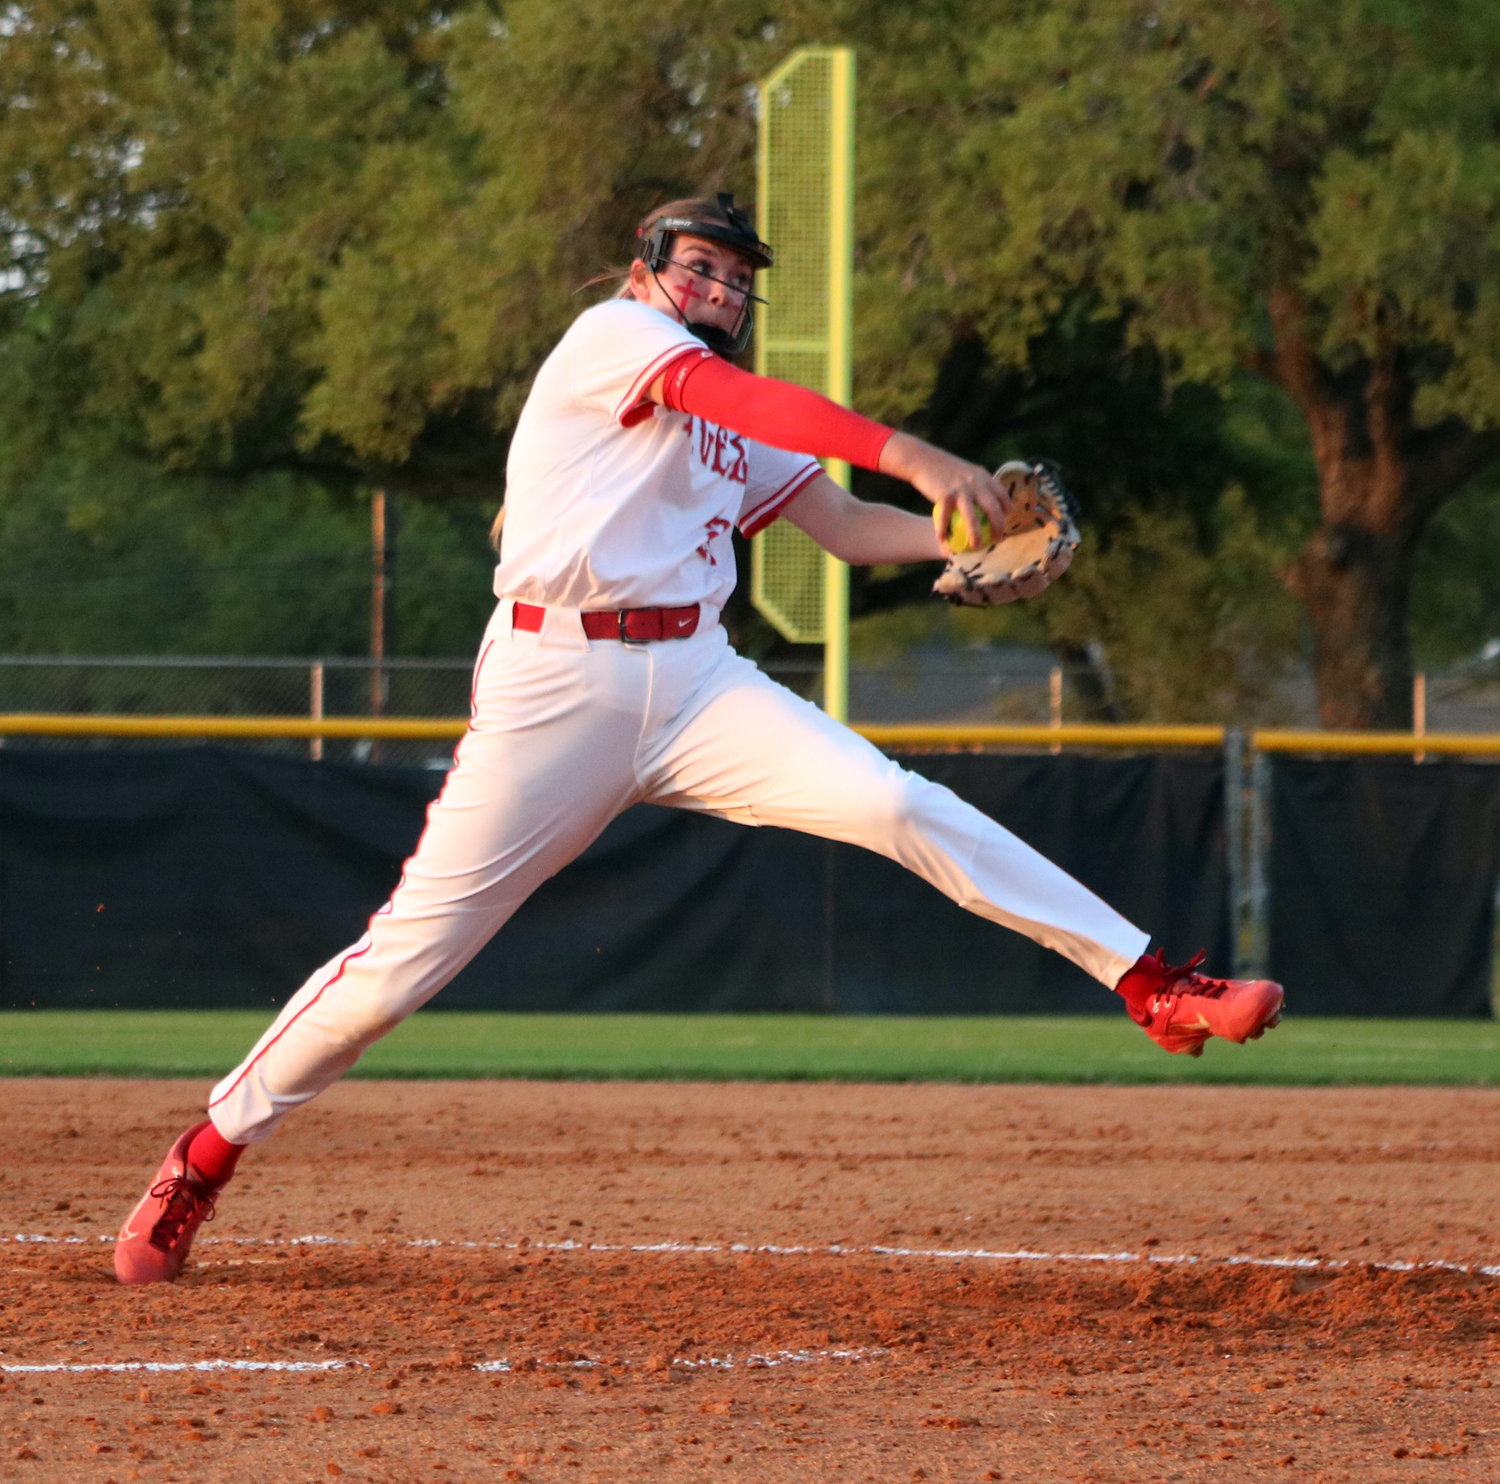 Cameryn Harrison pitches during Friday's District 19-6A game between Katy and Cinco Ranch at the Katy softball field.